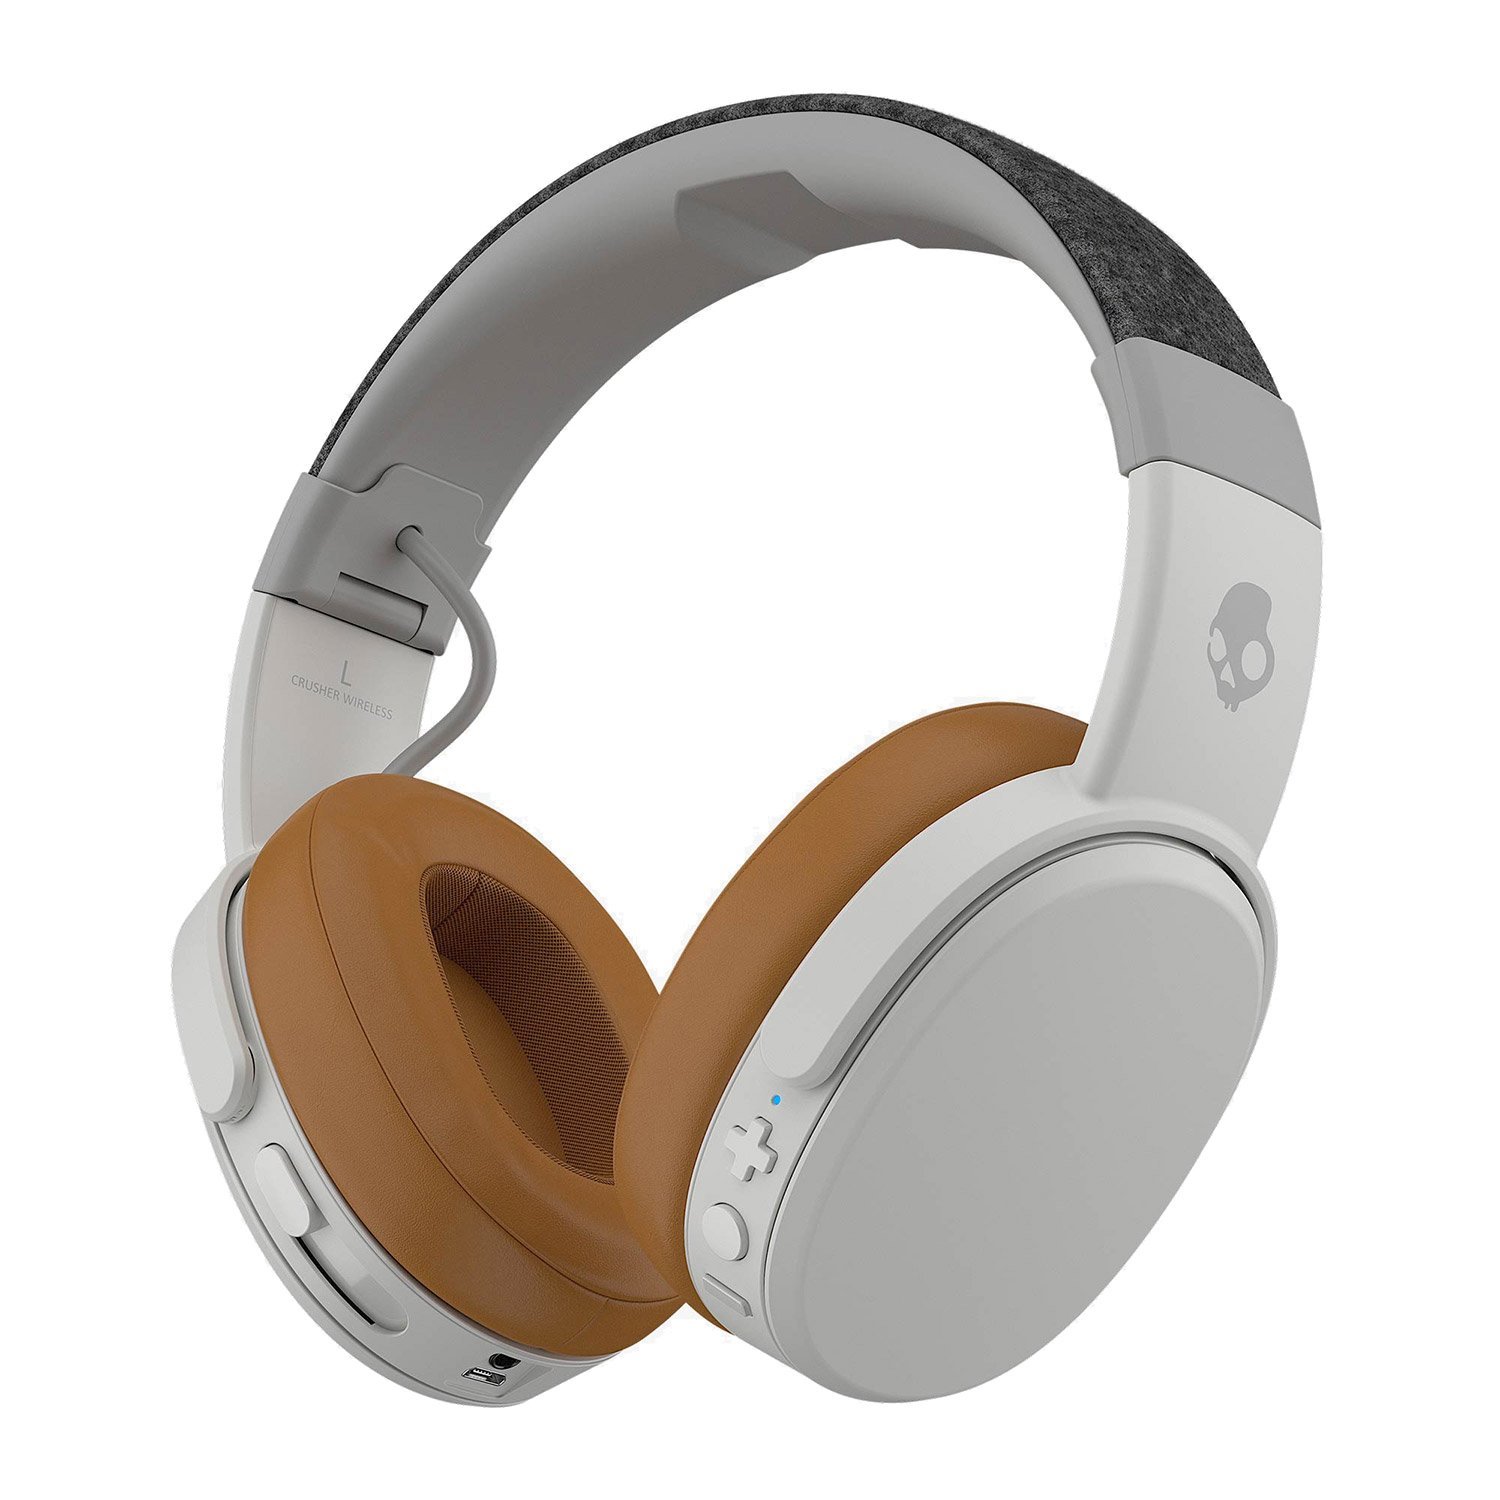 Looking to Buy Skullcandy Crusher ANC Headphones in 2023. Check Out These 10 Things First